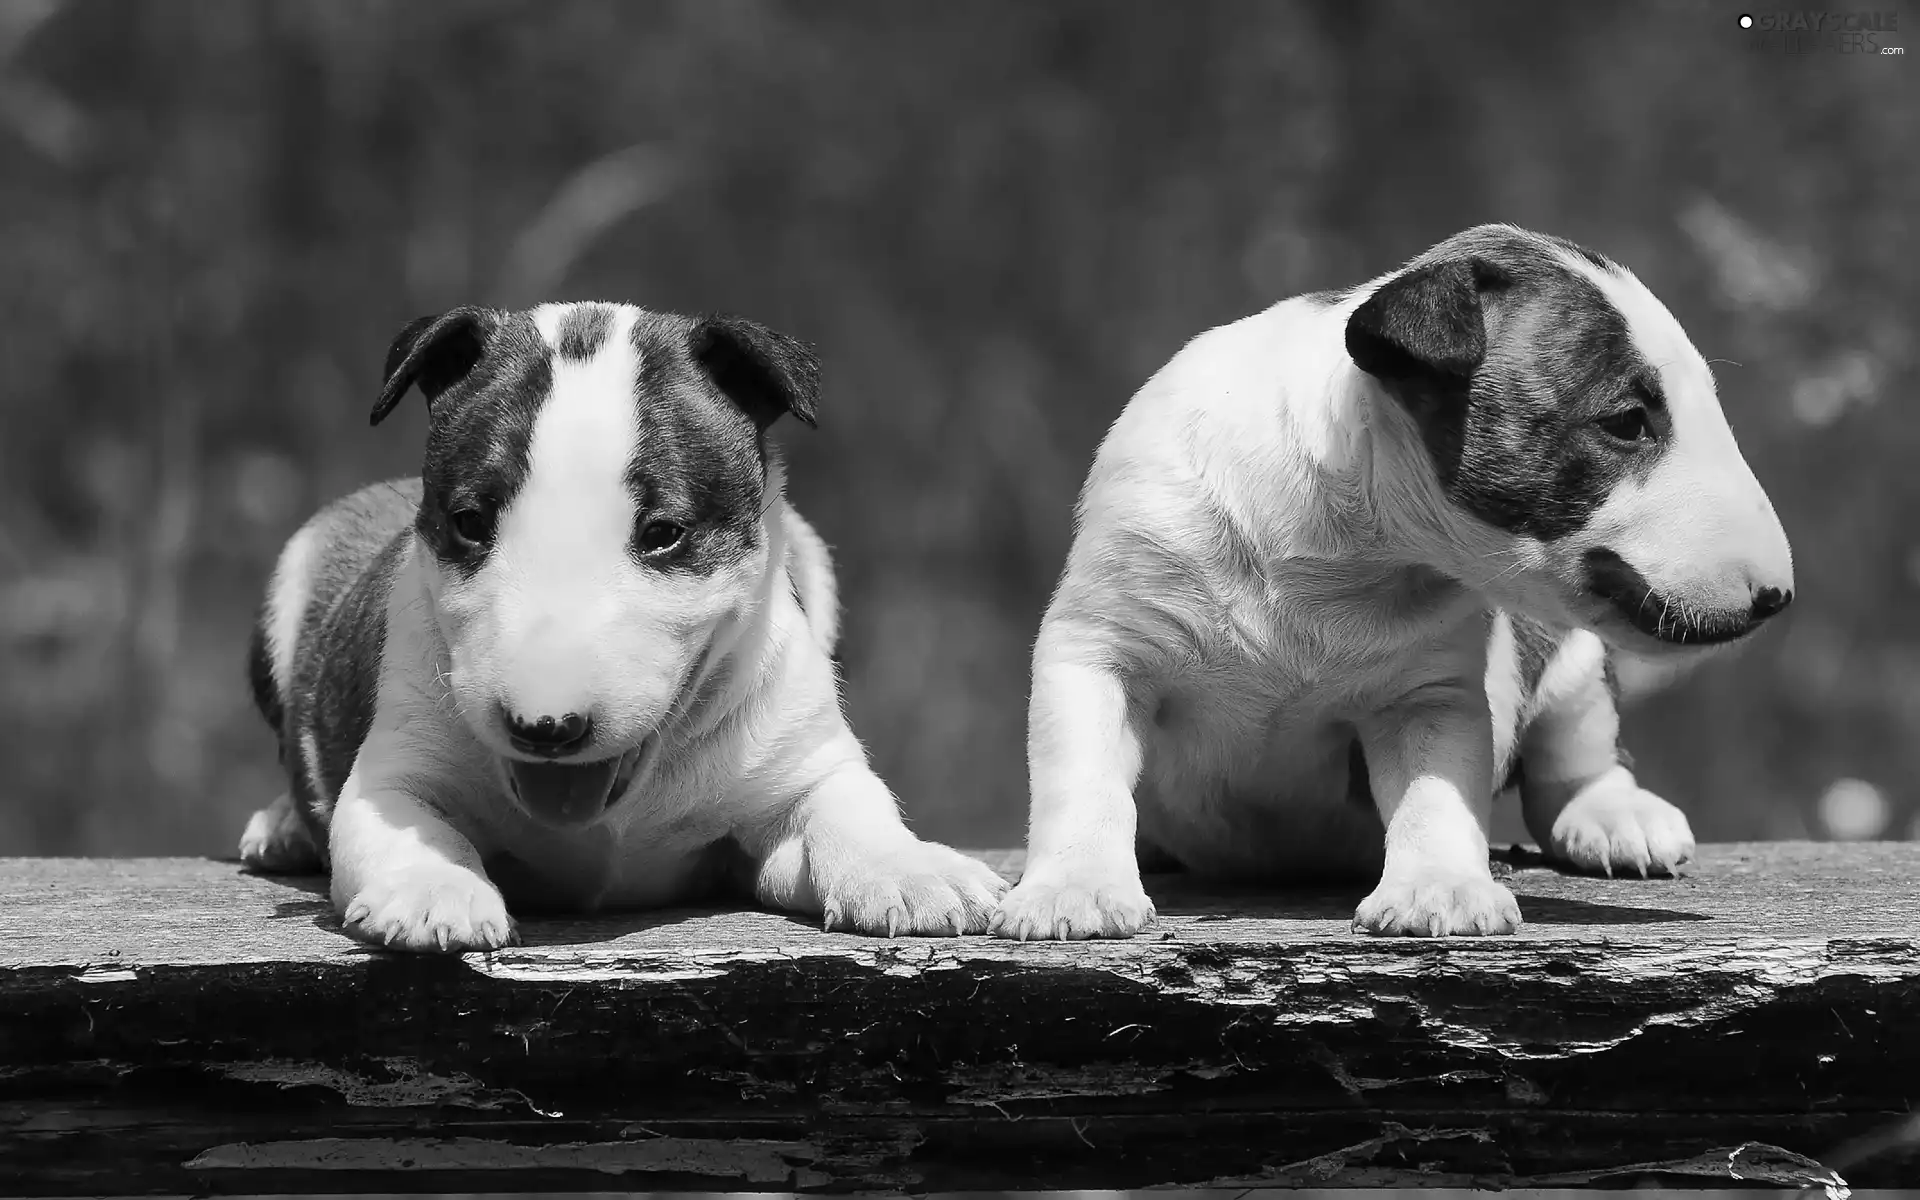 Dogs, white and brown, Bulteriery, puppies